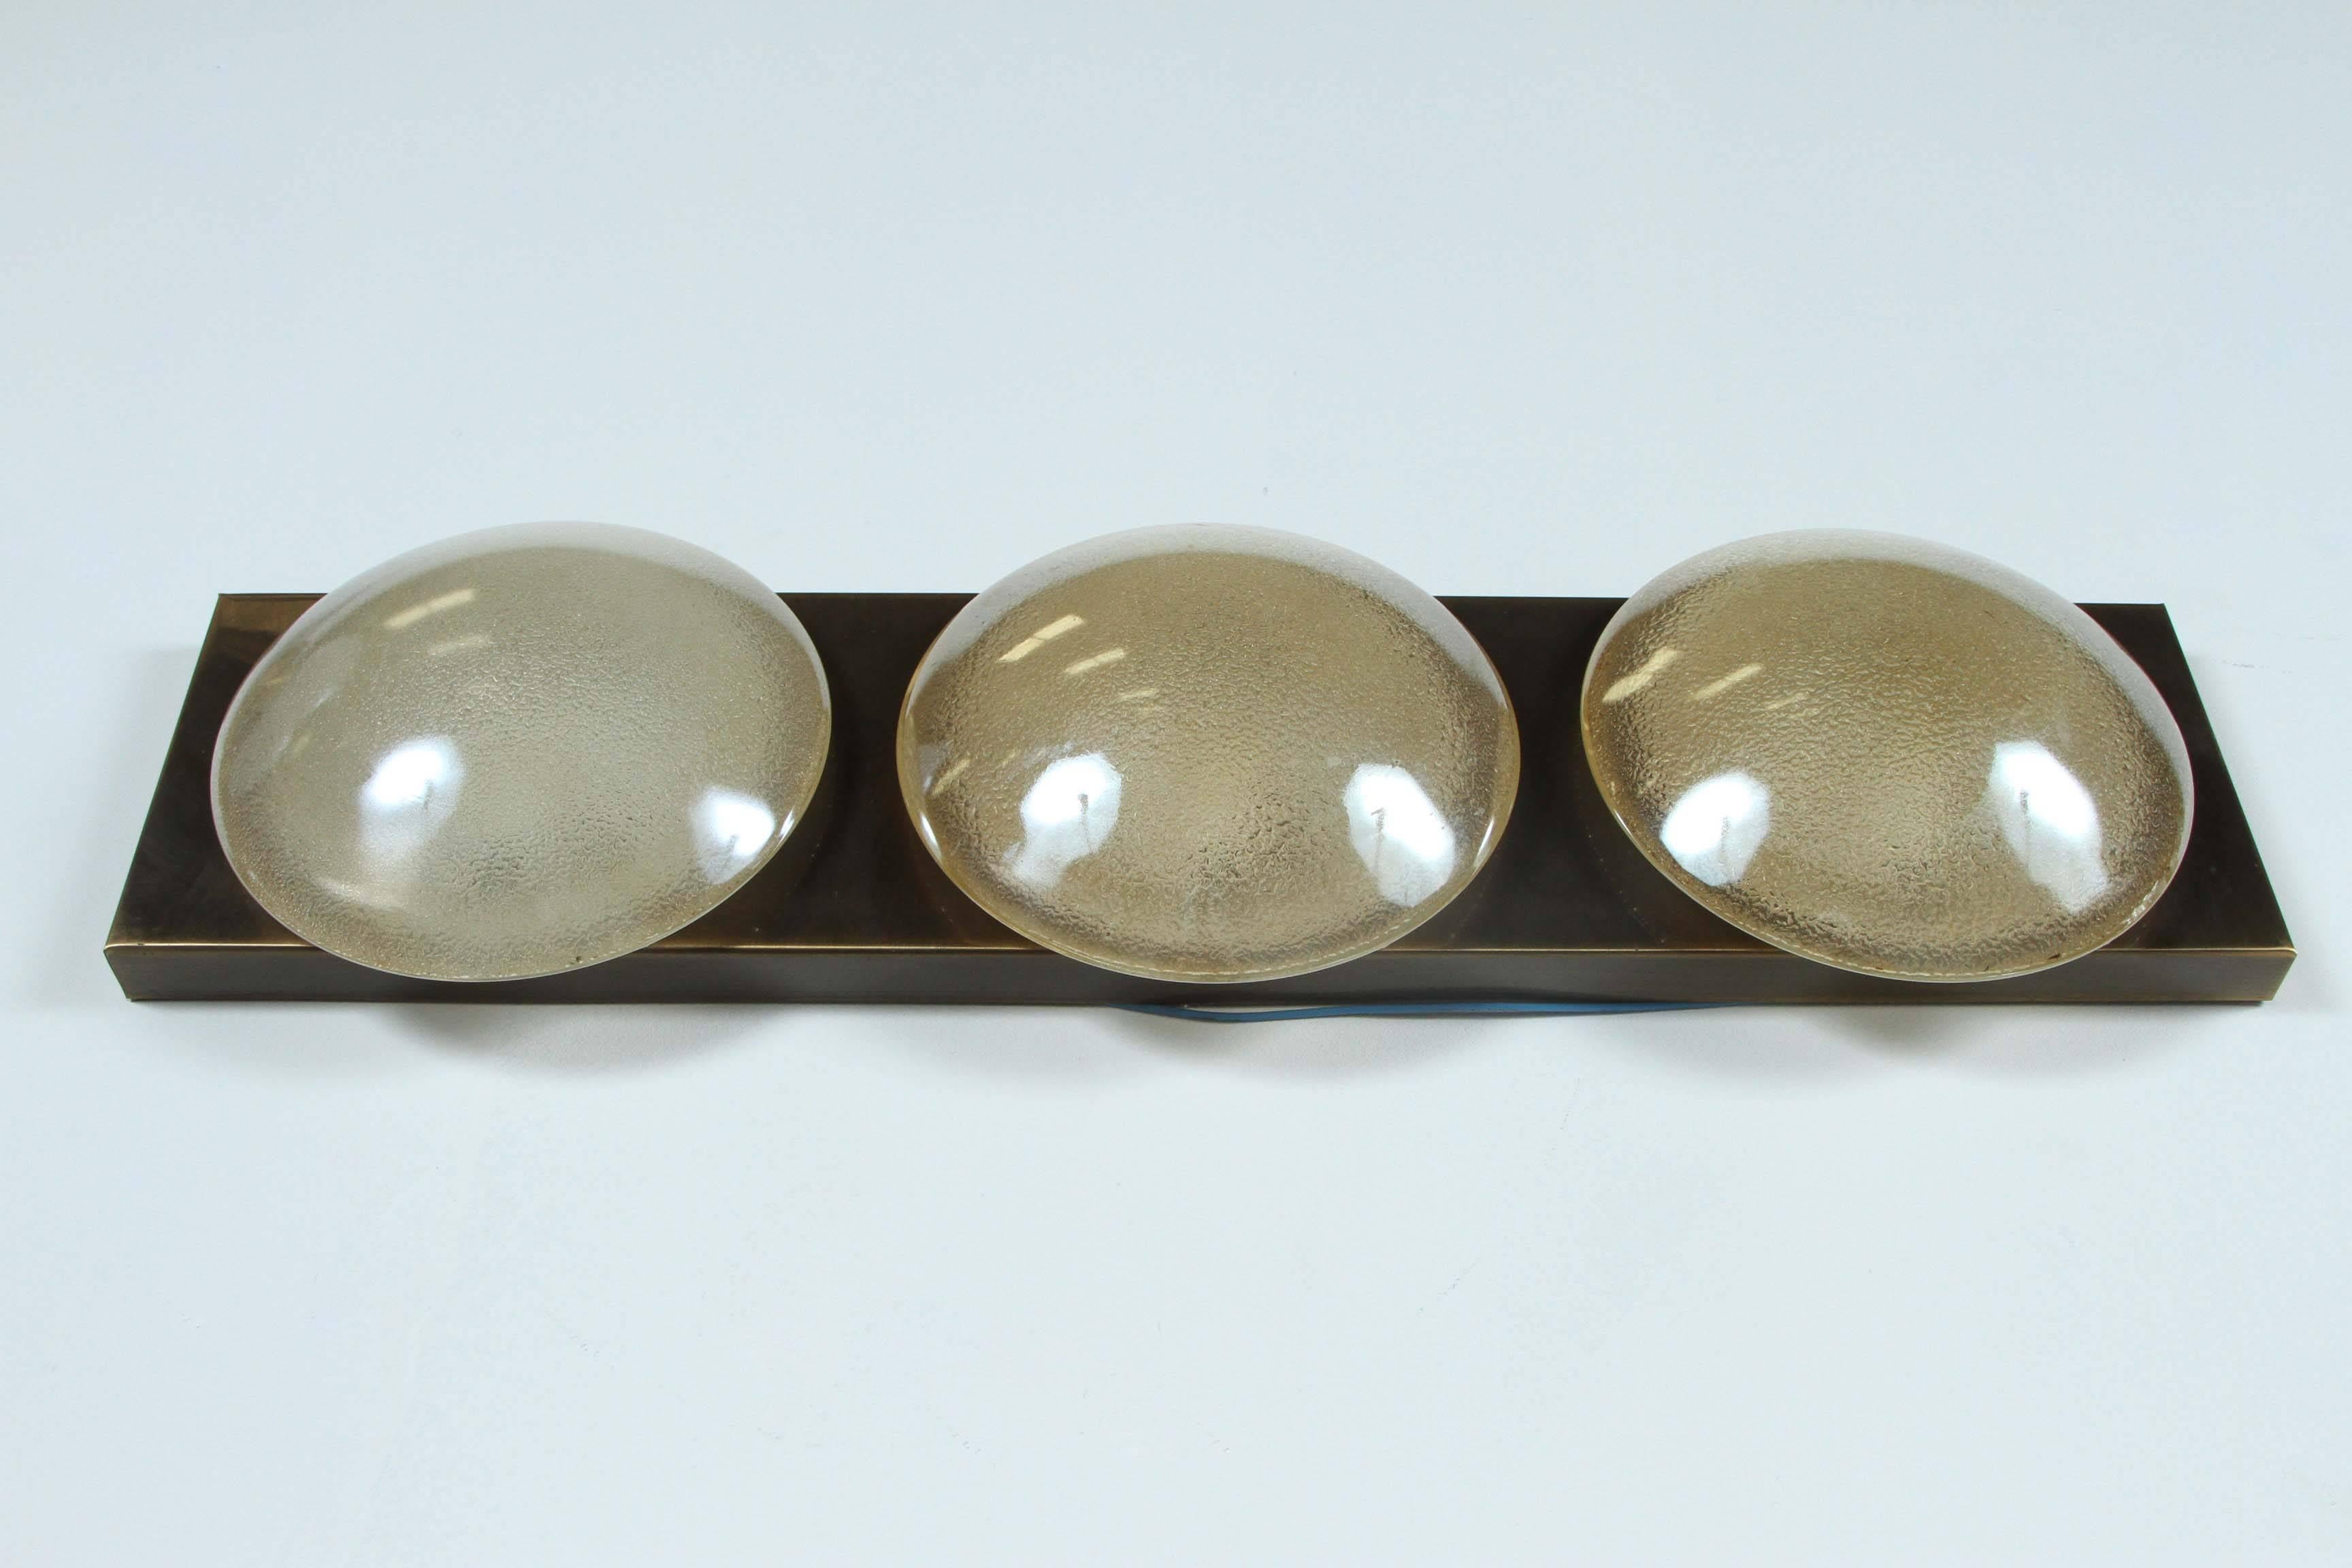 Great flush mount or sconce with three beautiful opalescent glass elements mounted on an antiqued brass fixture by Doria.